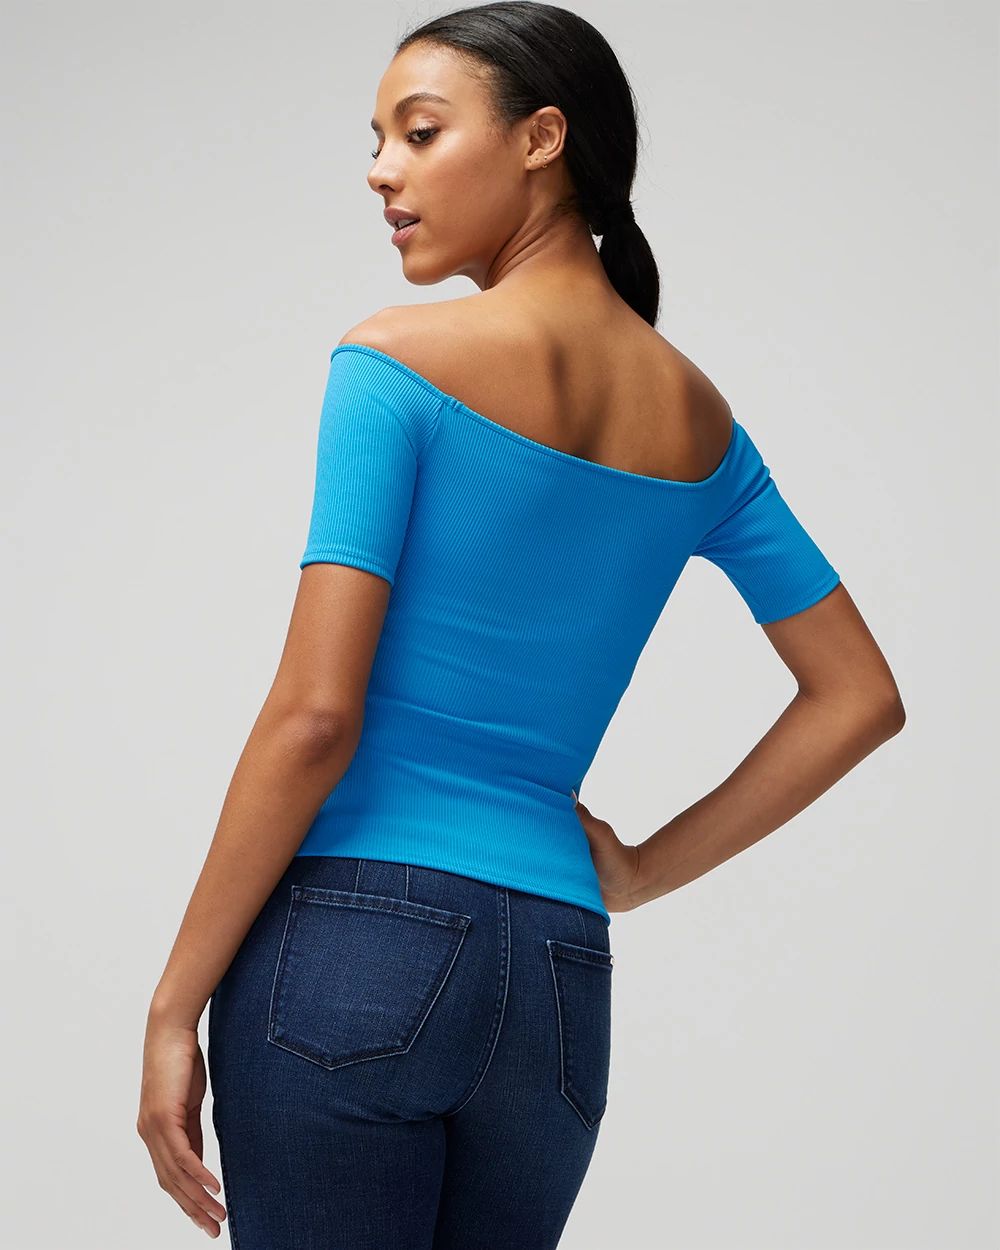 WHBM® FORME Off-the-Shoulder Rib Top click to view larger image.